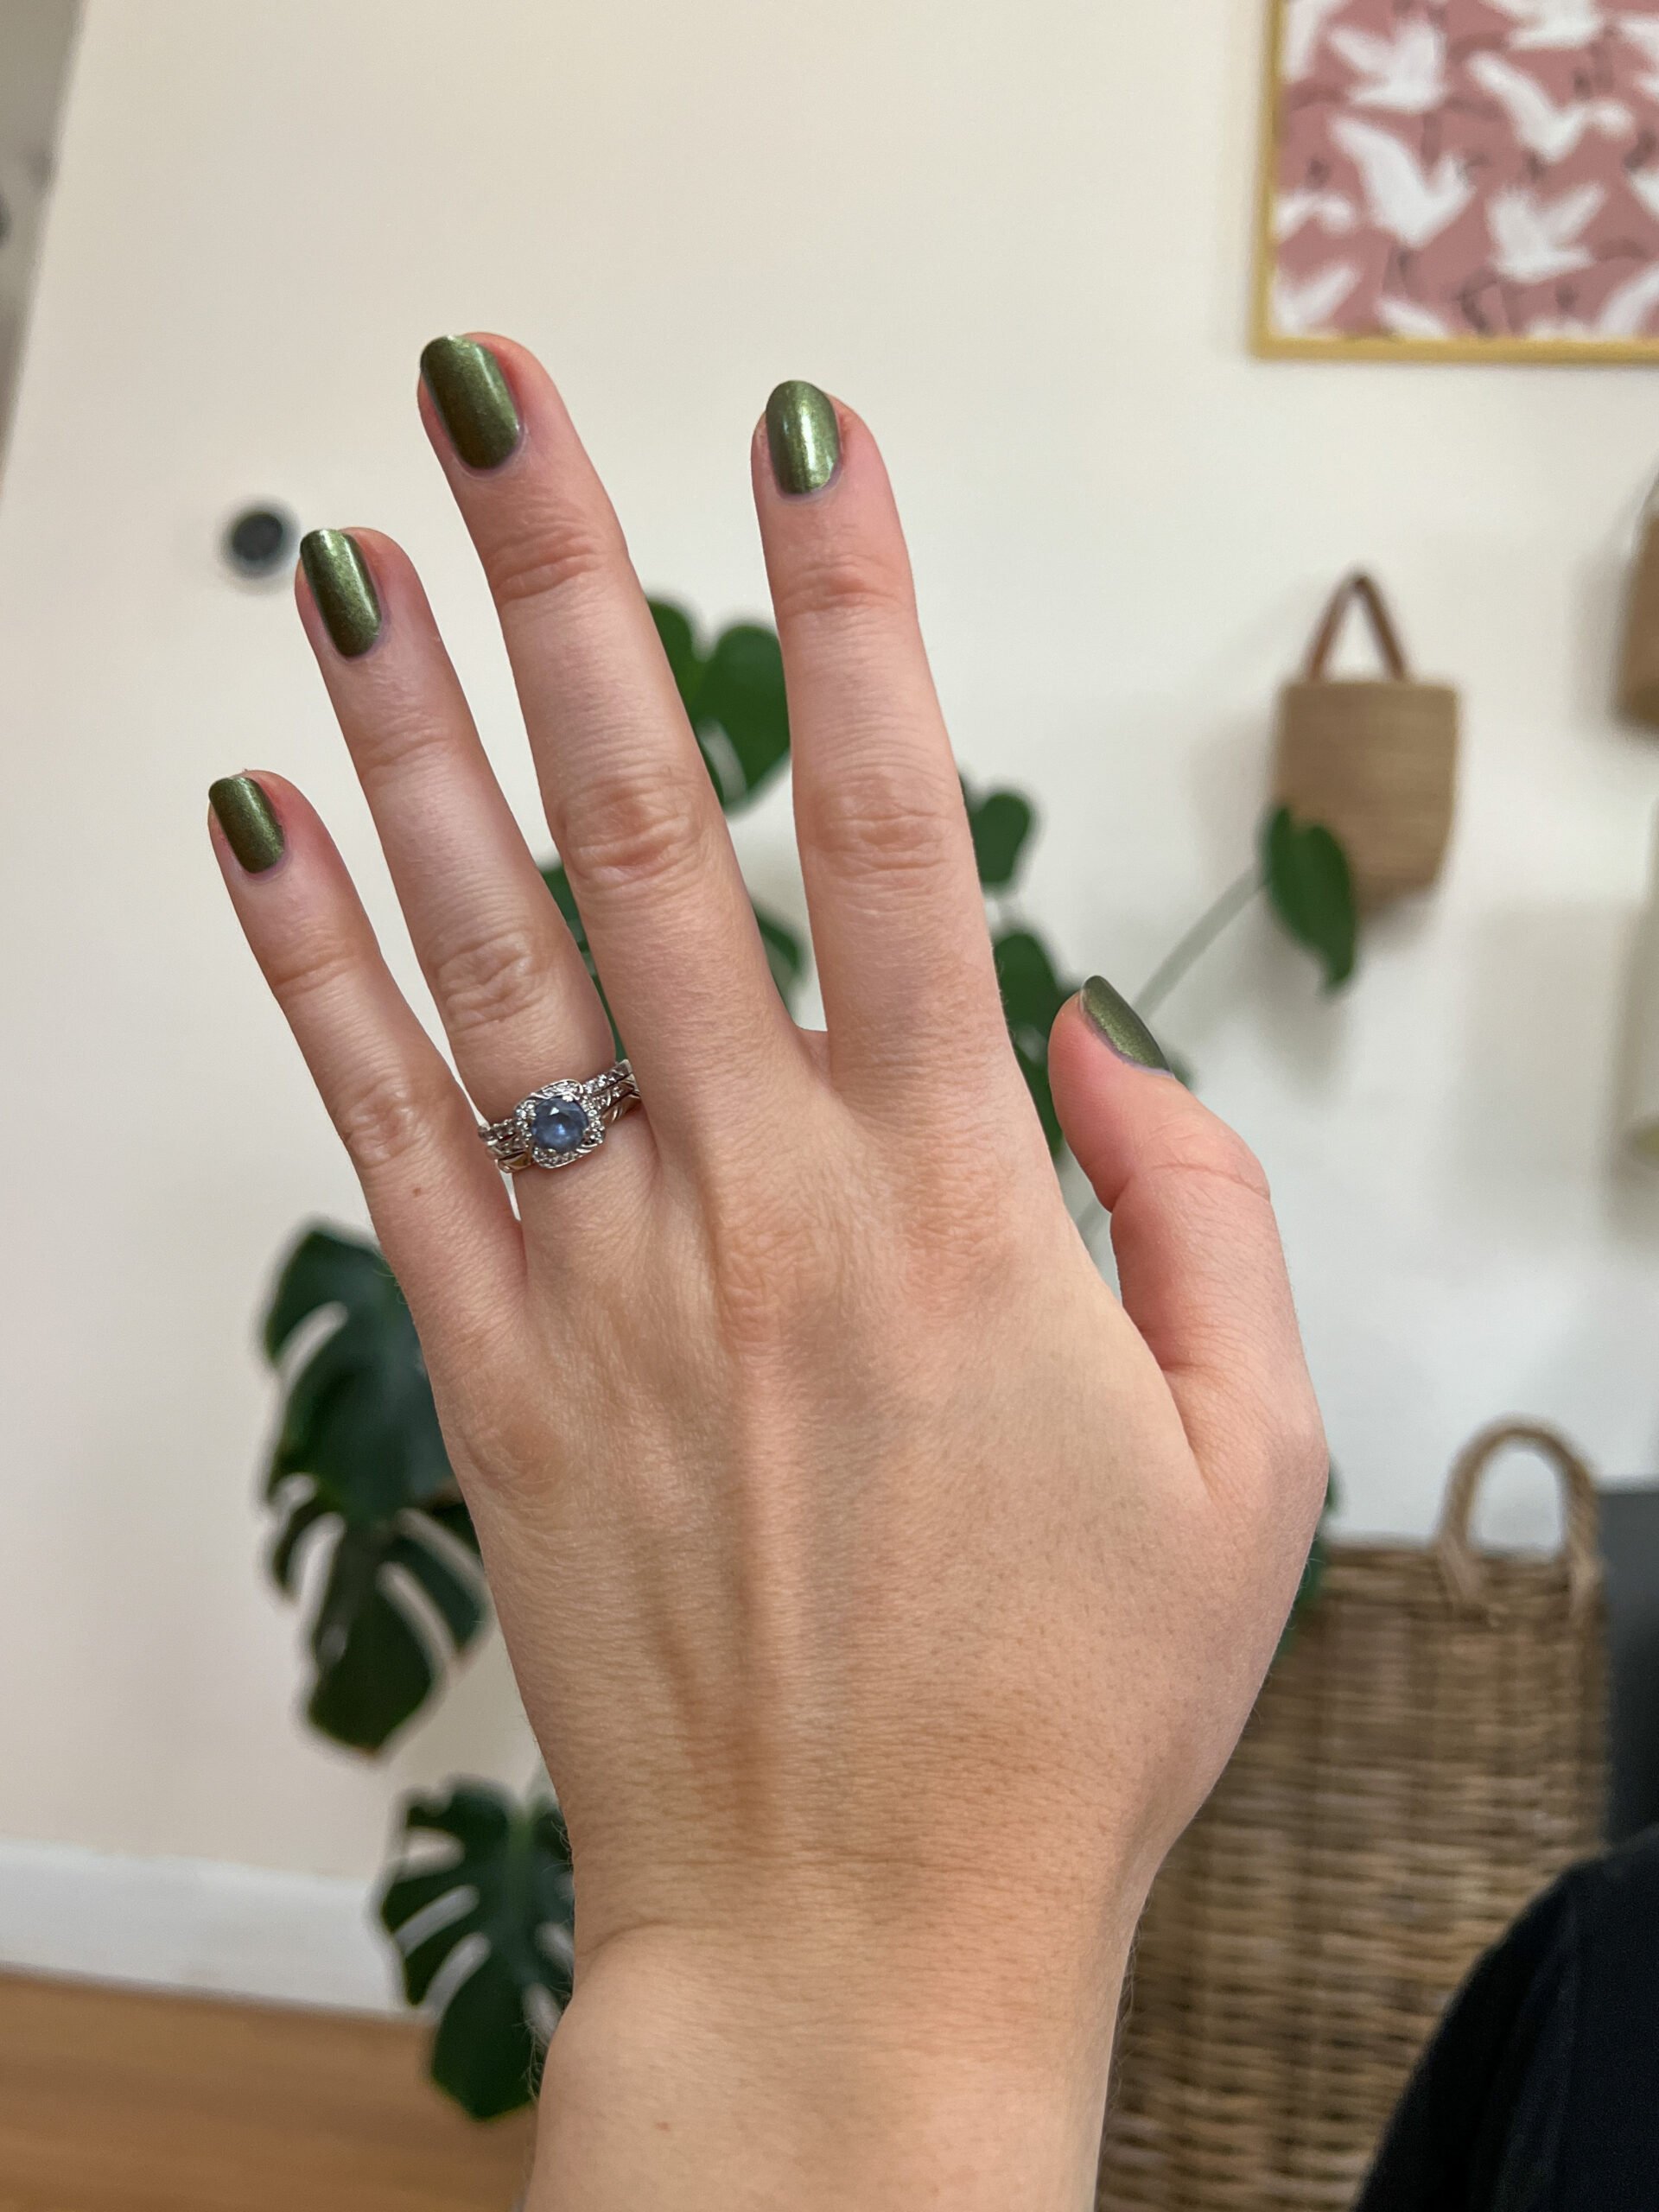 A hand with dark green painted nails. 